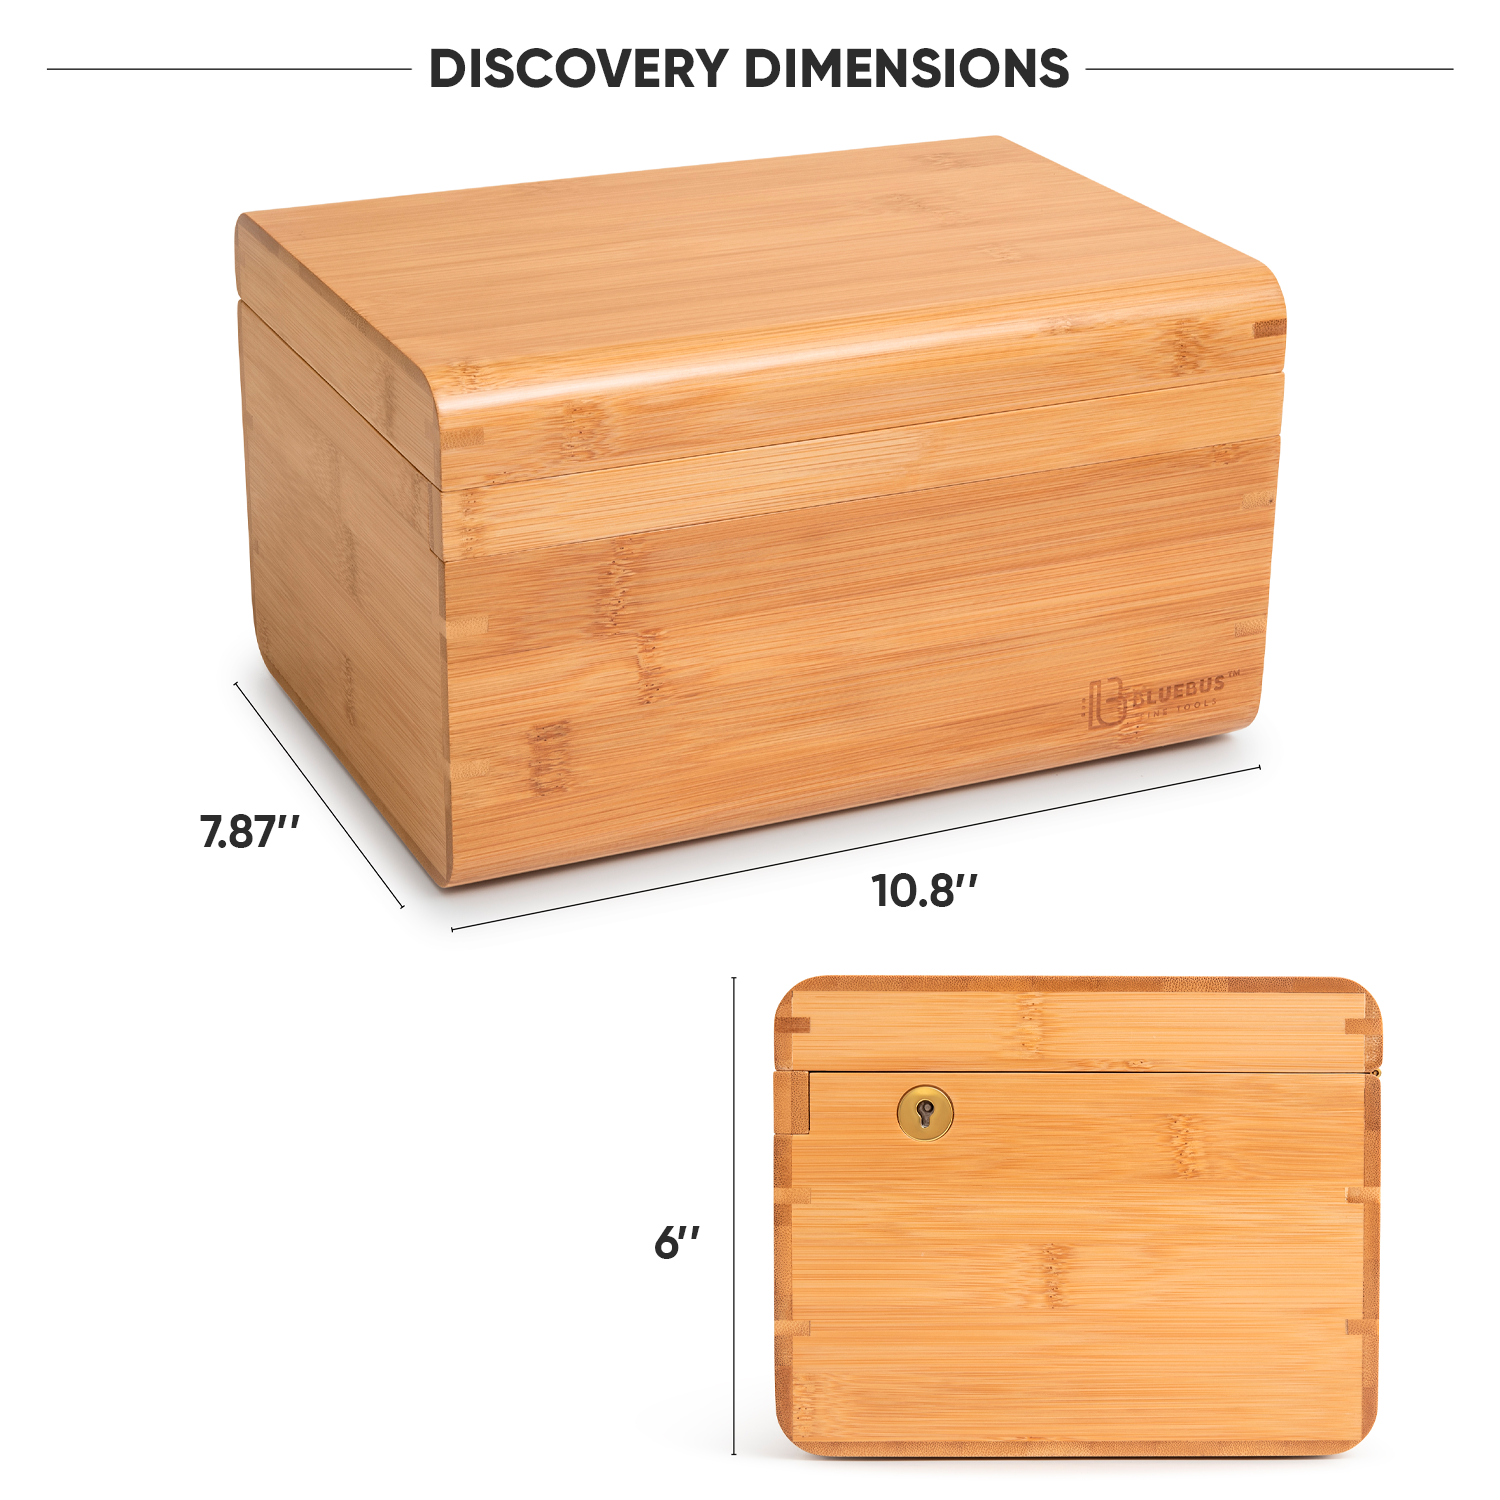 BlueBus DISCOVERY Storage Box Natural